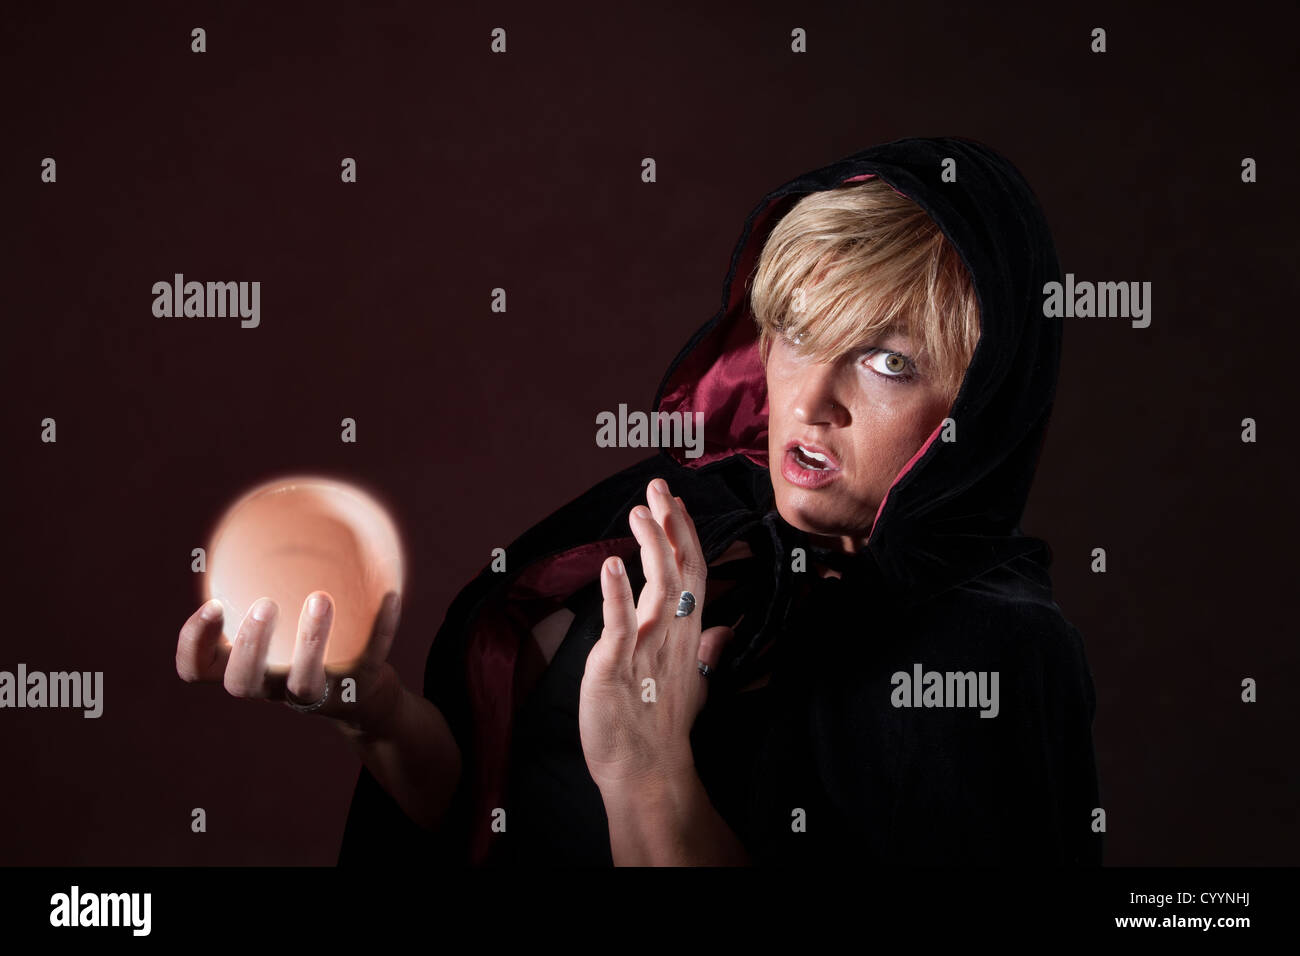 Caucasian female fortuneteller wearing black viel holds crystal ball over maroon background Stock Photo